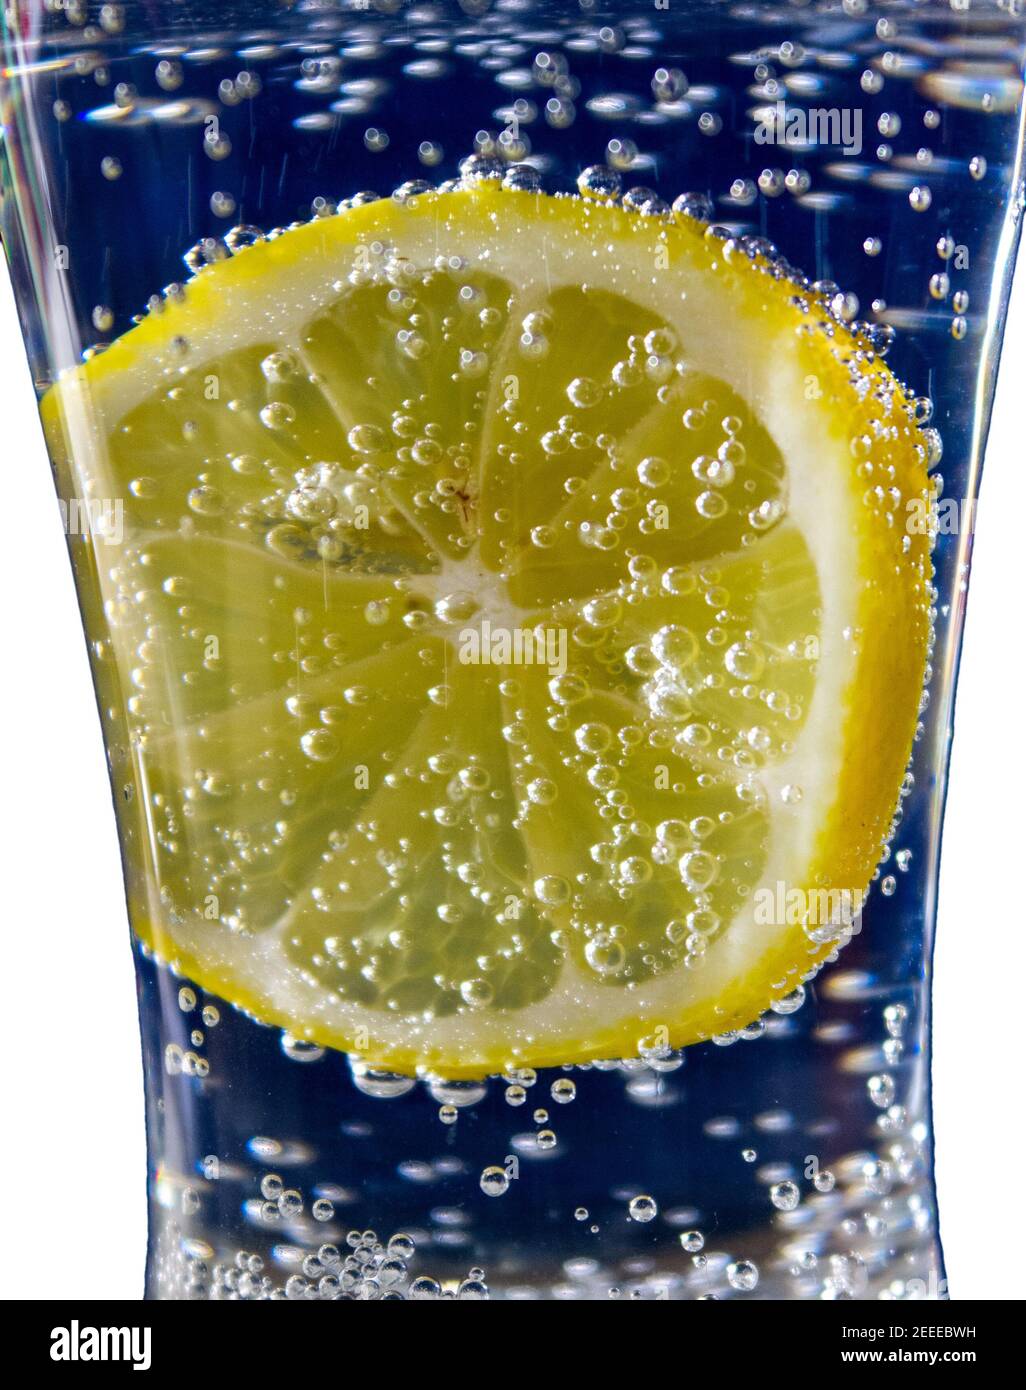 lemon in soda water on a blue background Stock Photo